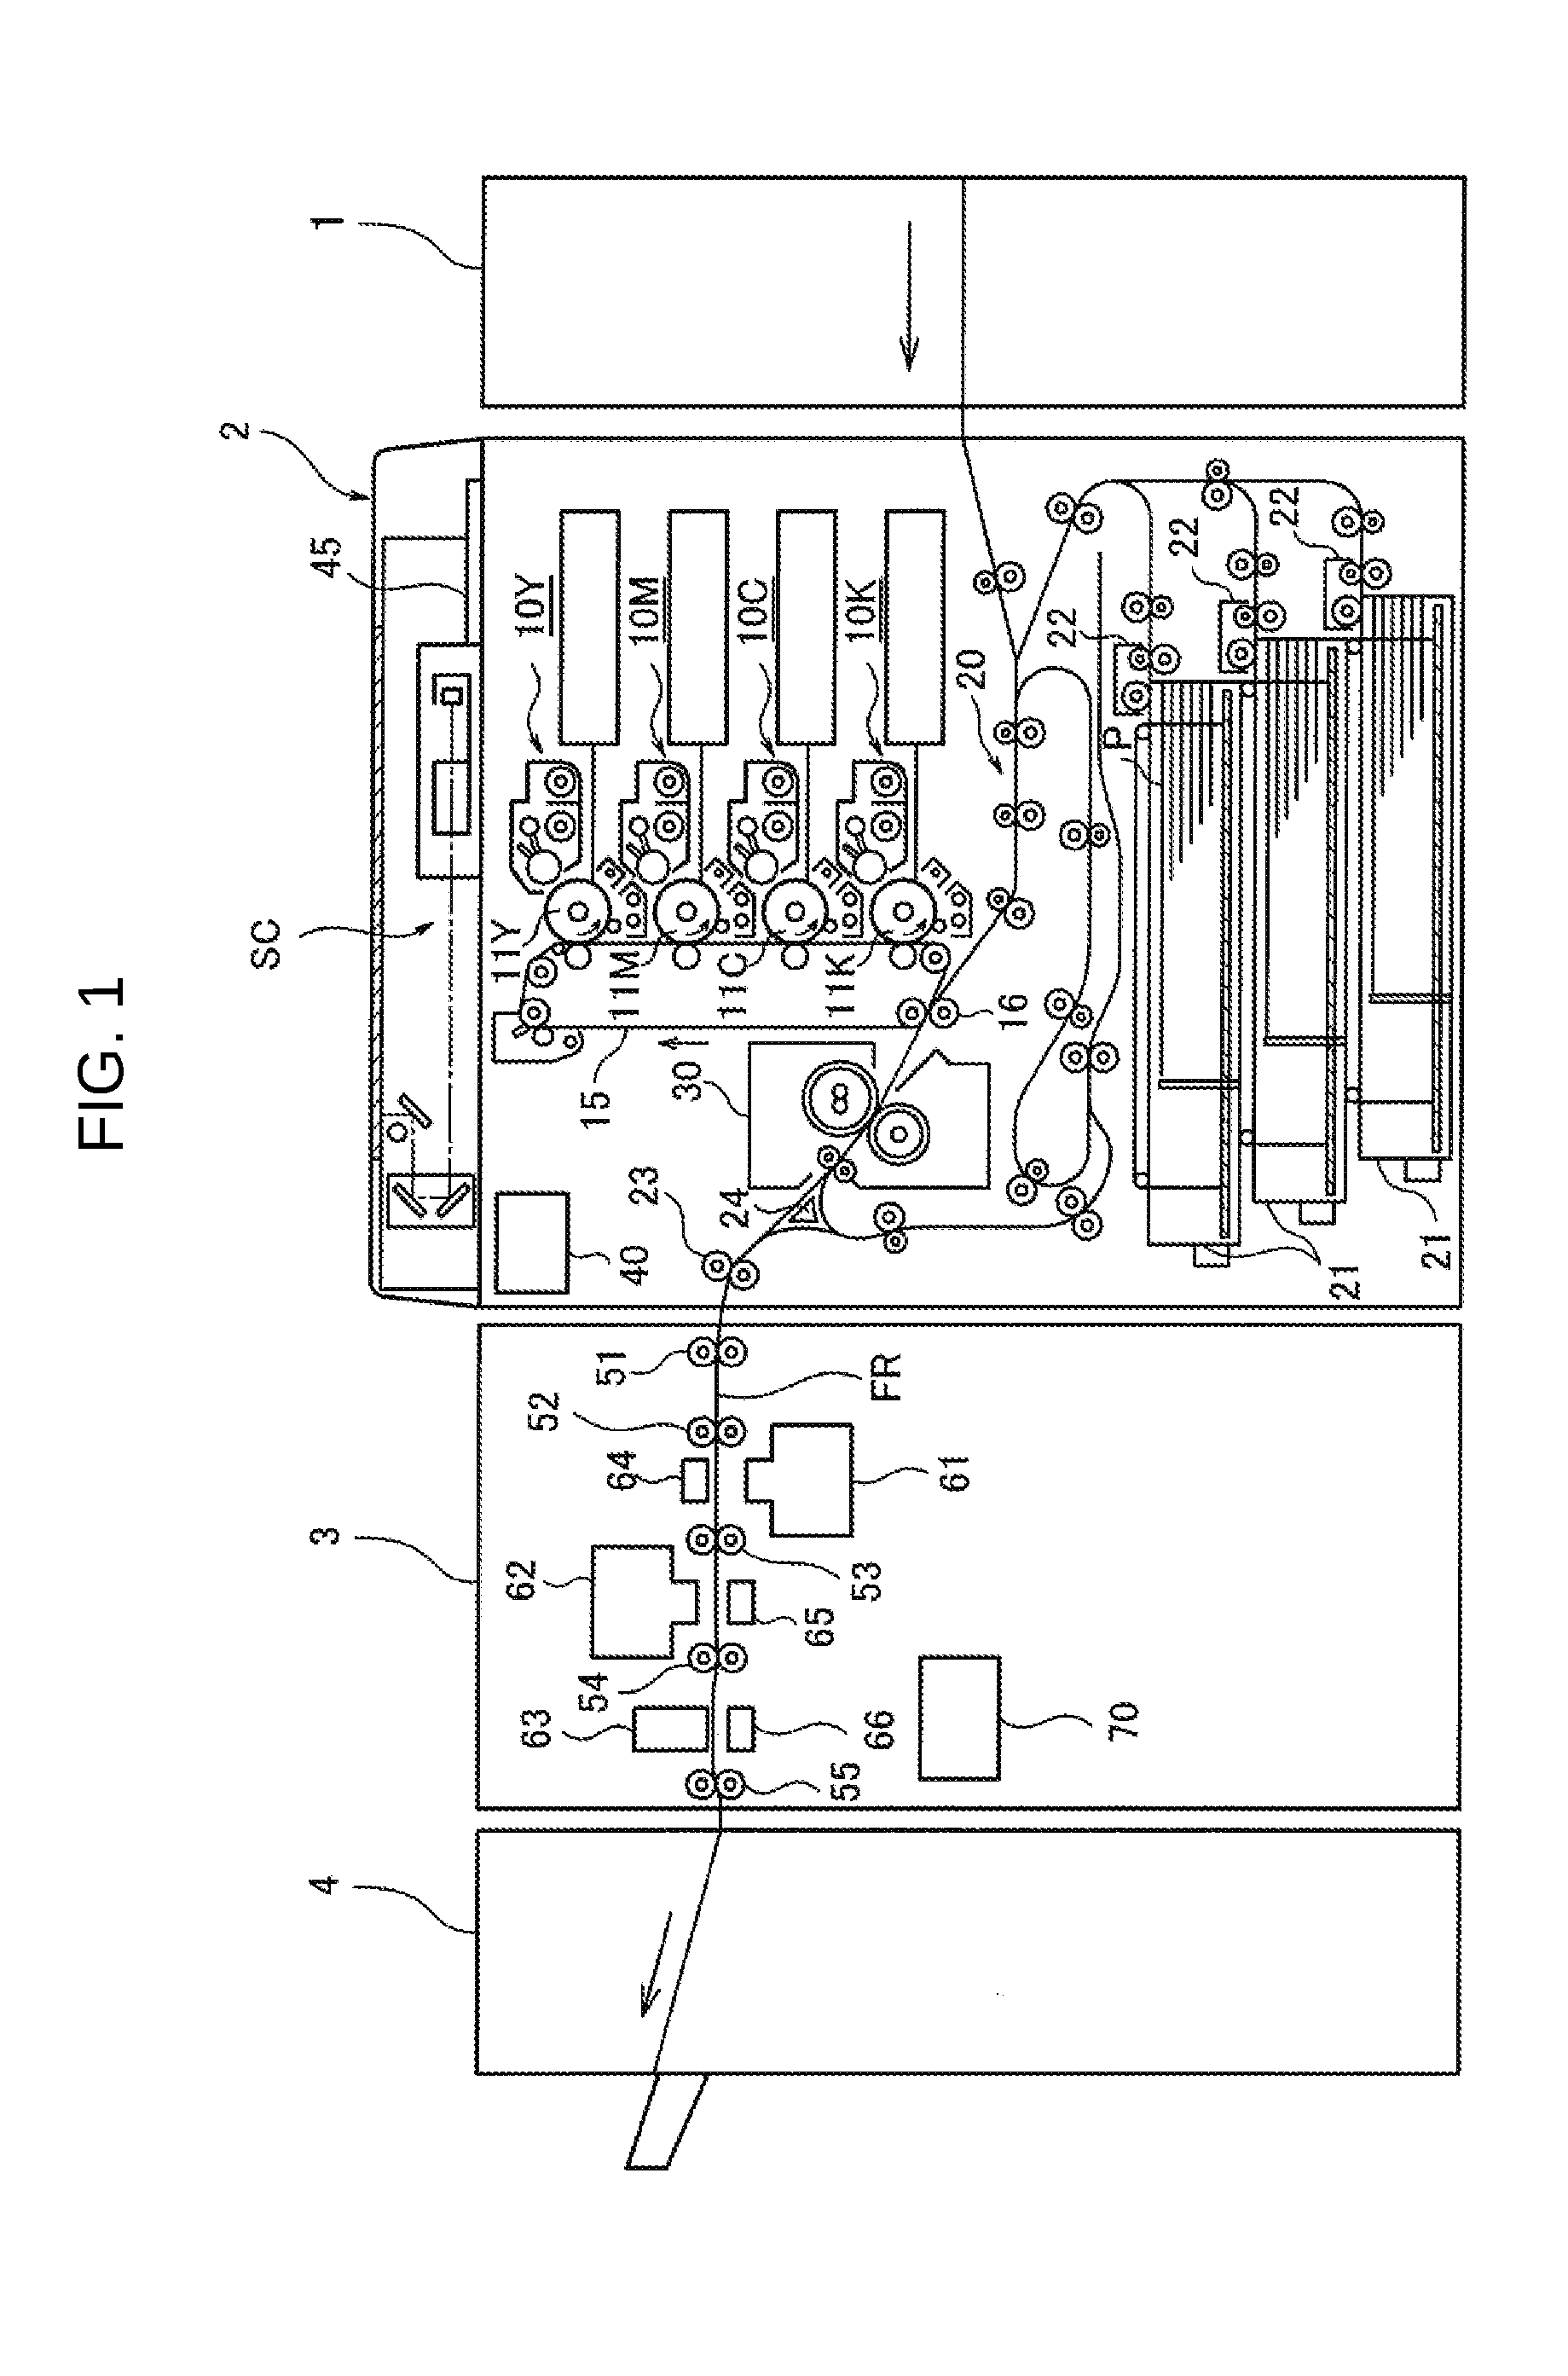 Image reading apparatus and image forming system